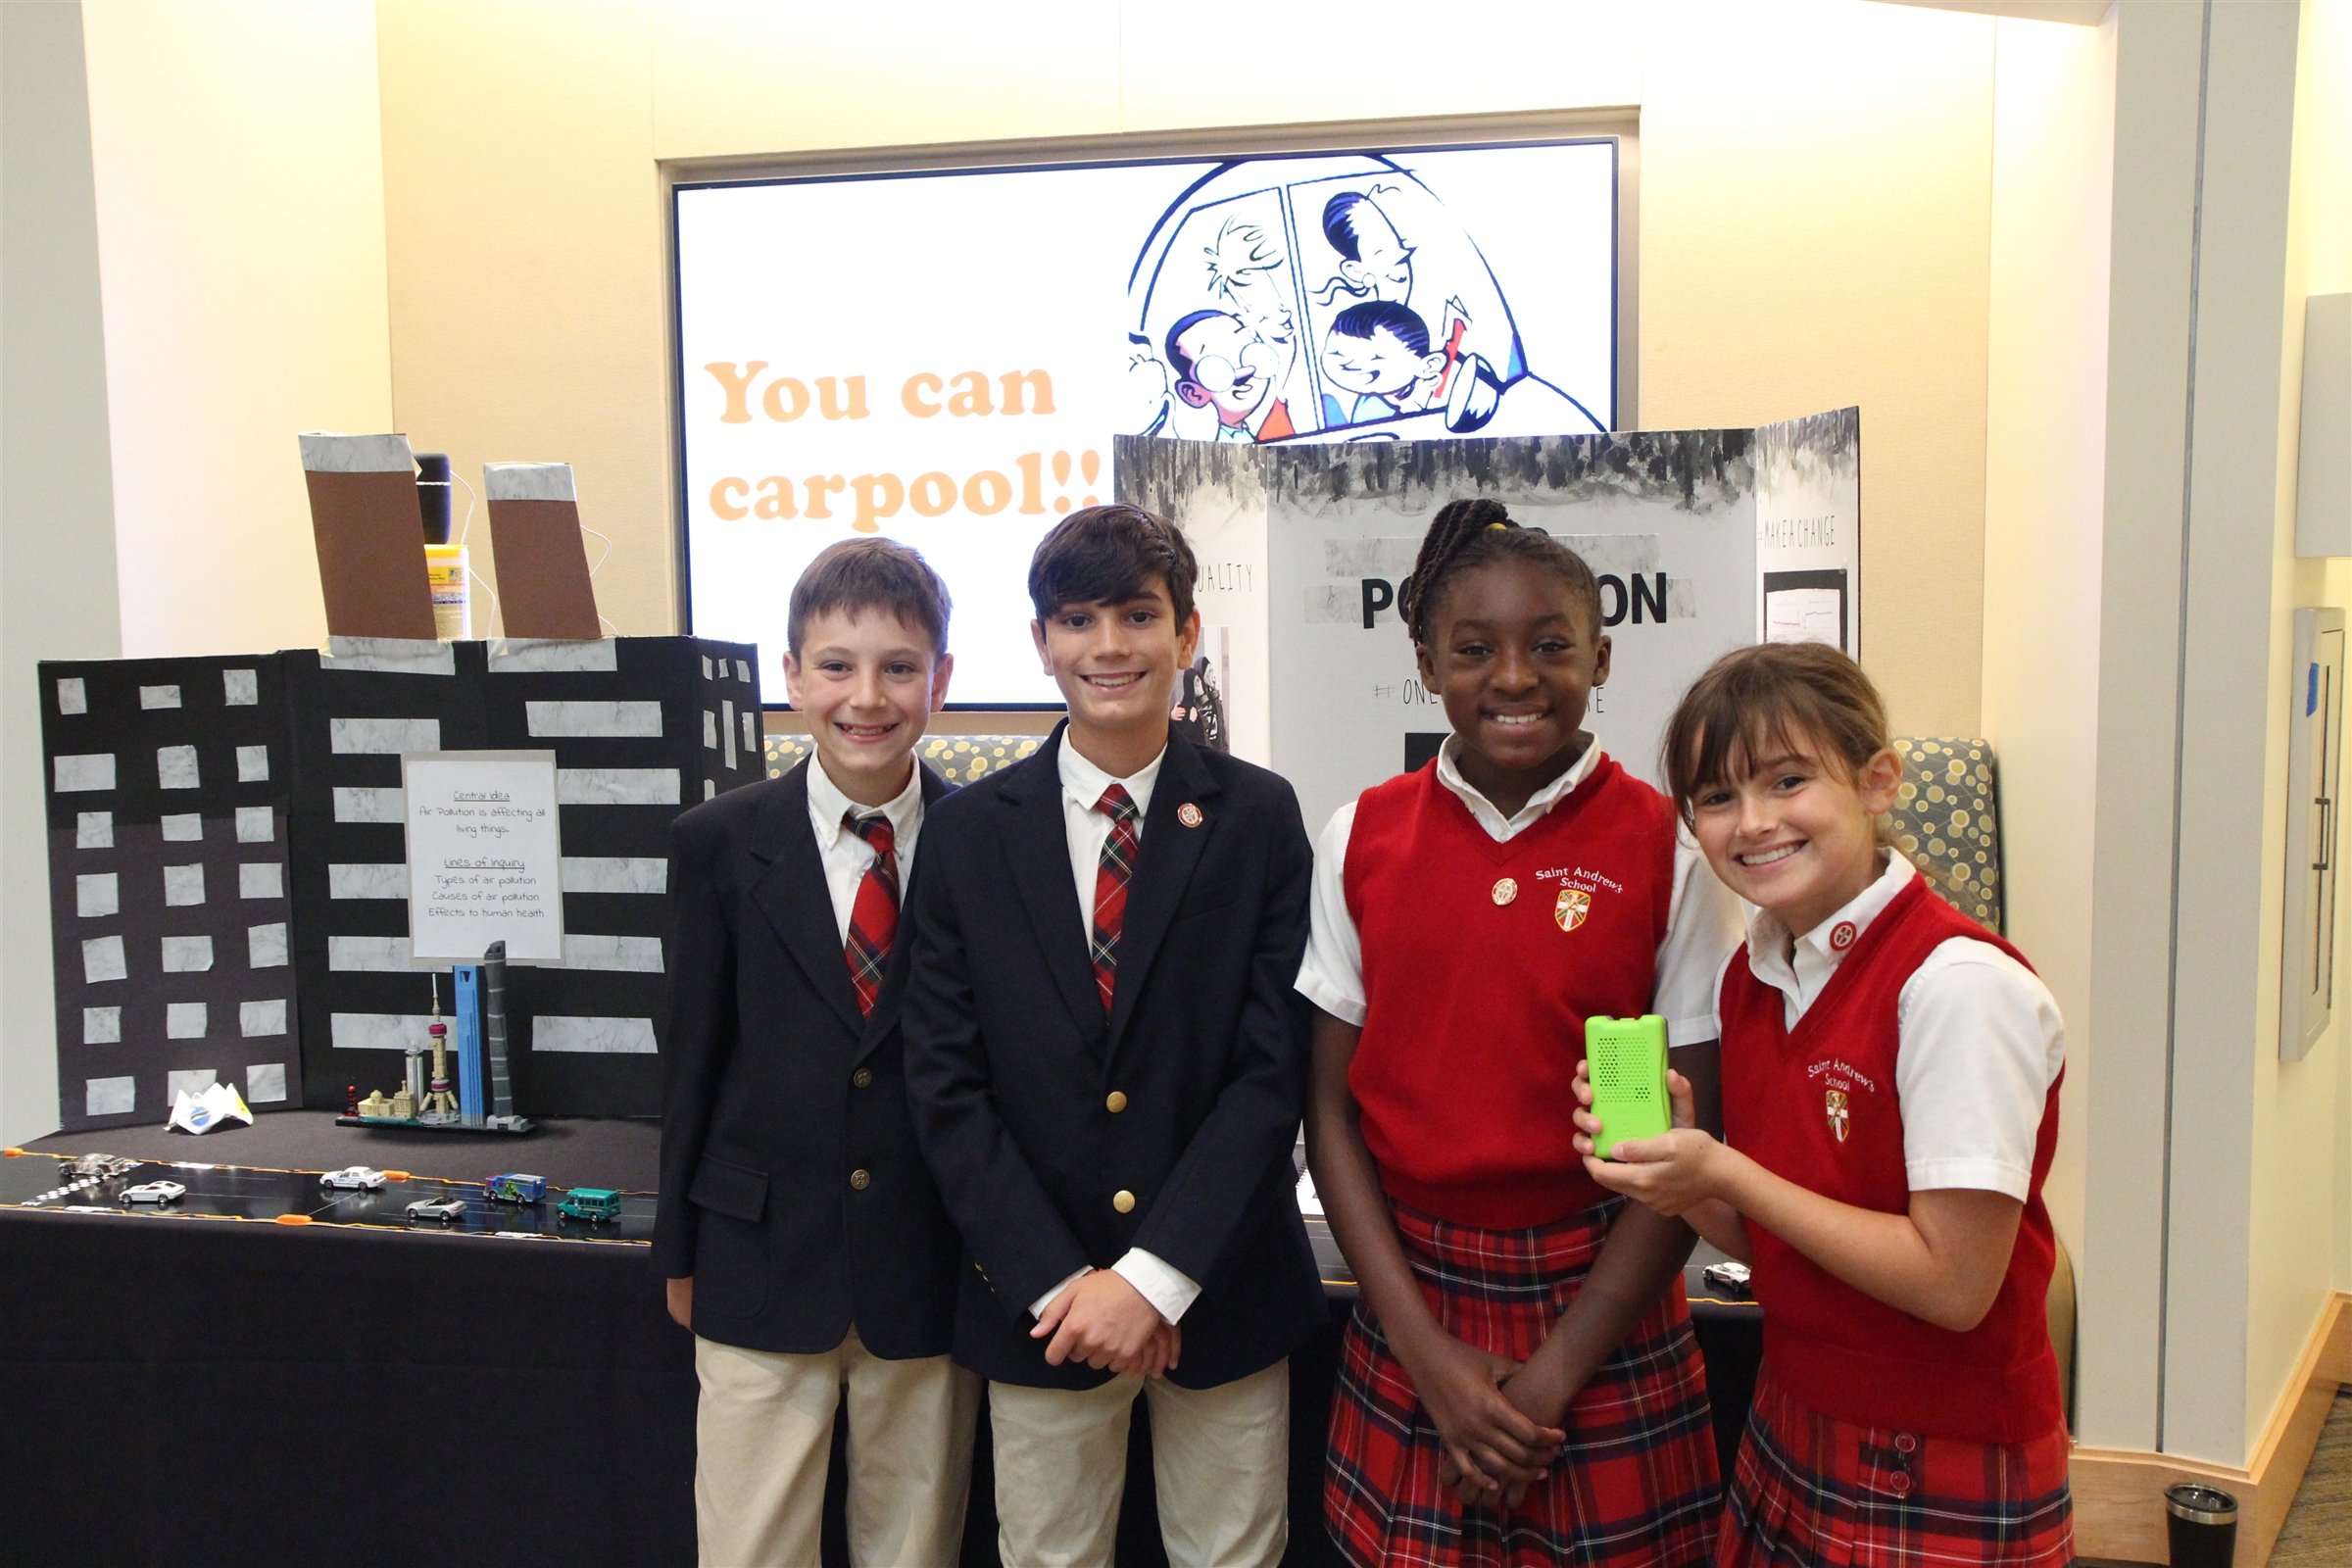 First School in Florida to Use PocketLab Air to Monitor Air Pollution